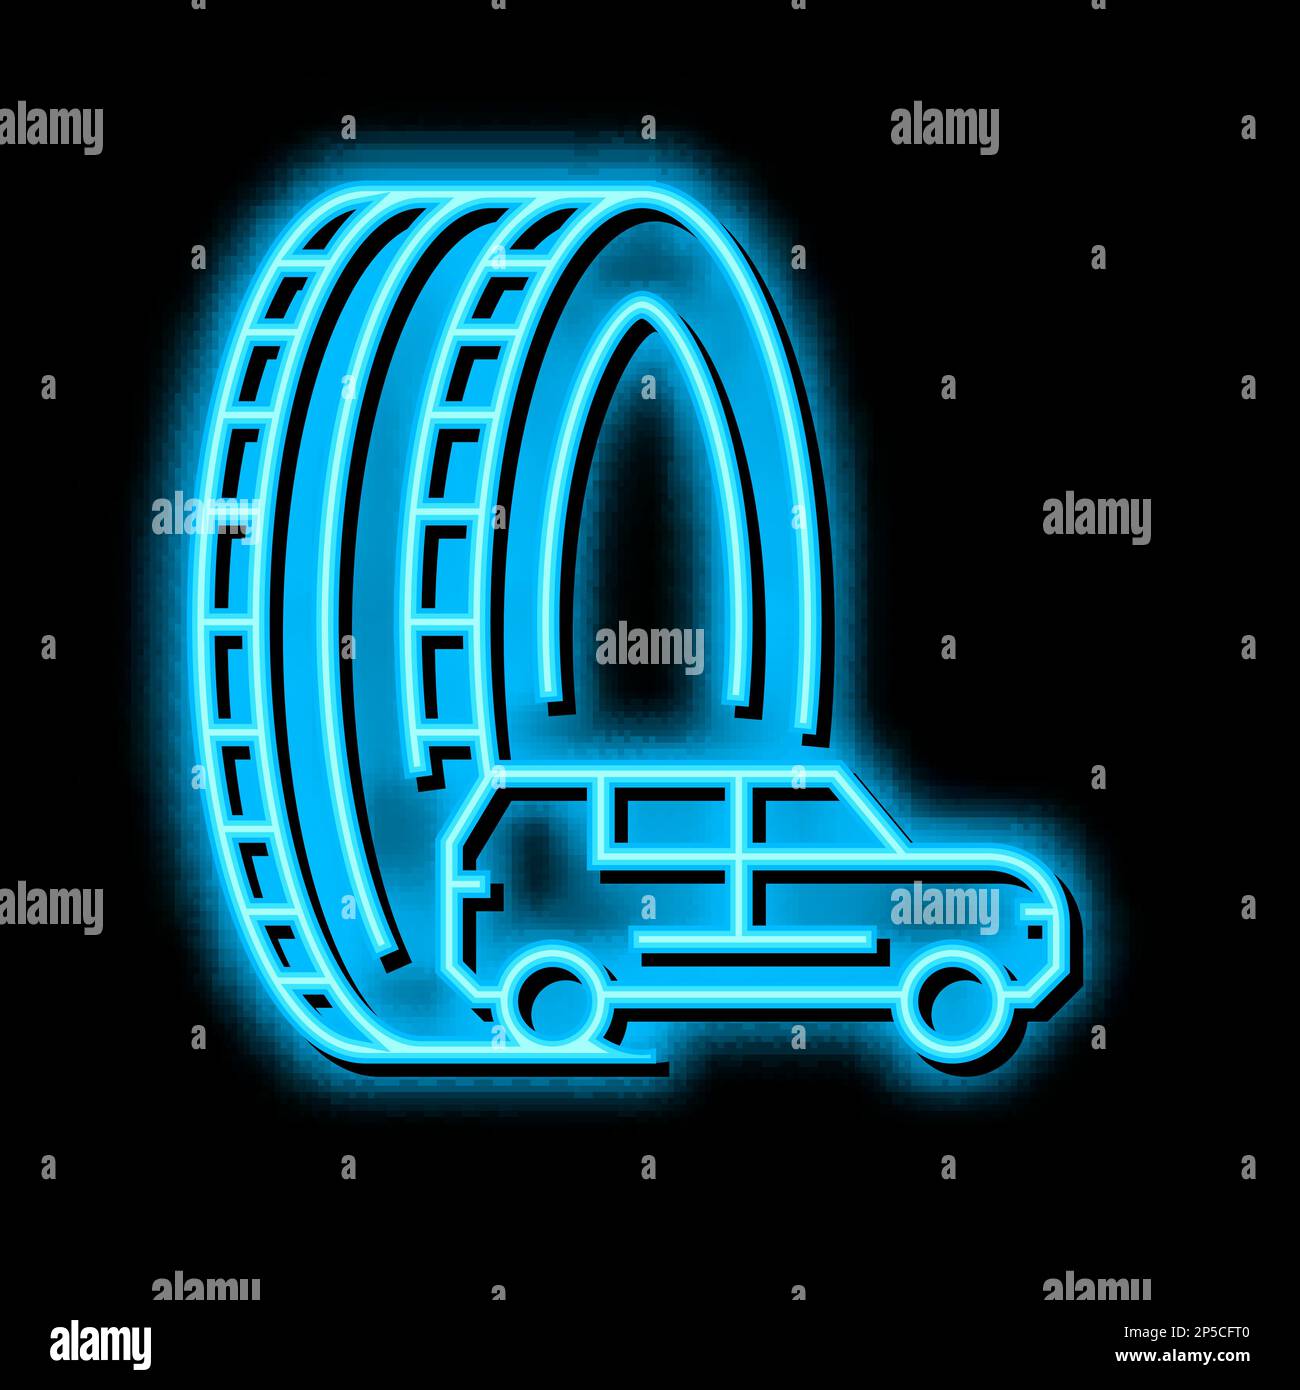 truck or suv tires neon glow icon illustration Stock Vector